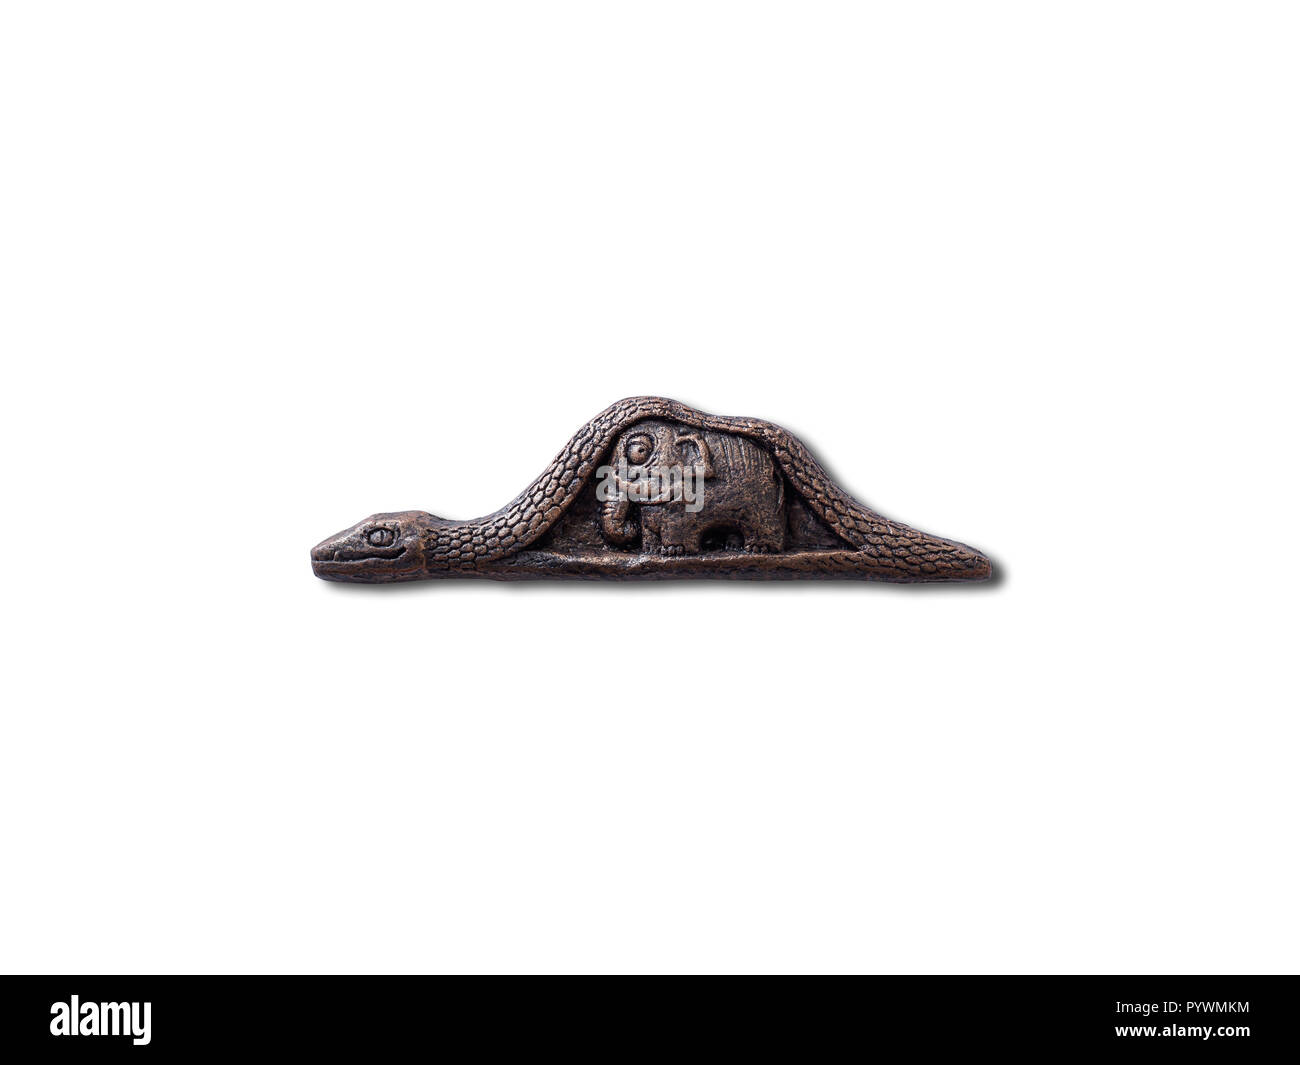 Bronze Souvenir Boa Constrictor digesting an Elephant from The Little Prince novella by Antoine de Saint-Exupery isolated on white background Stock Photo